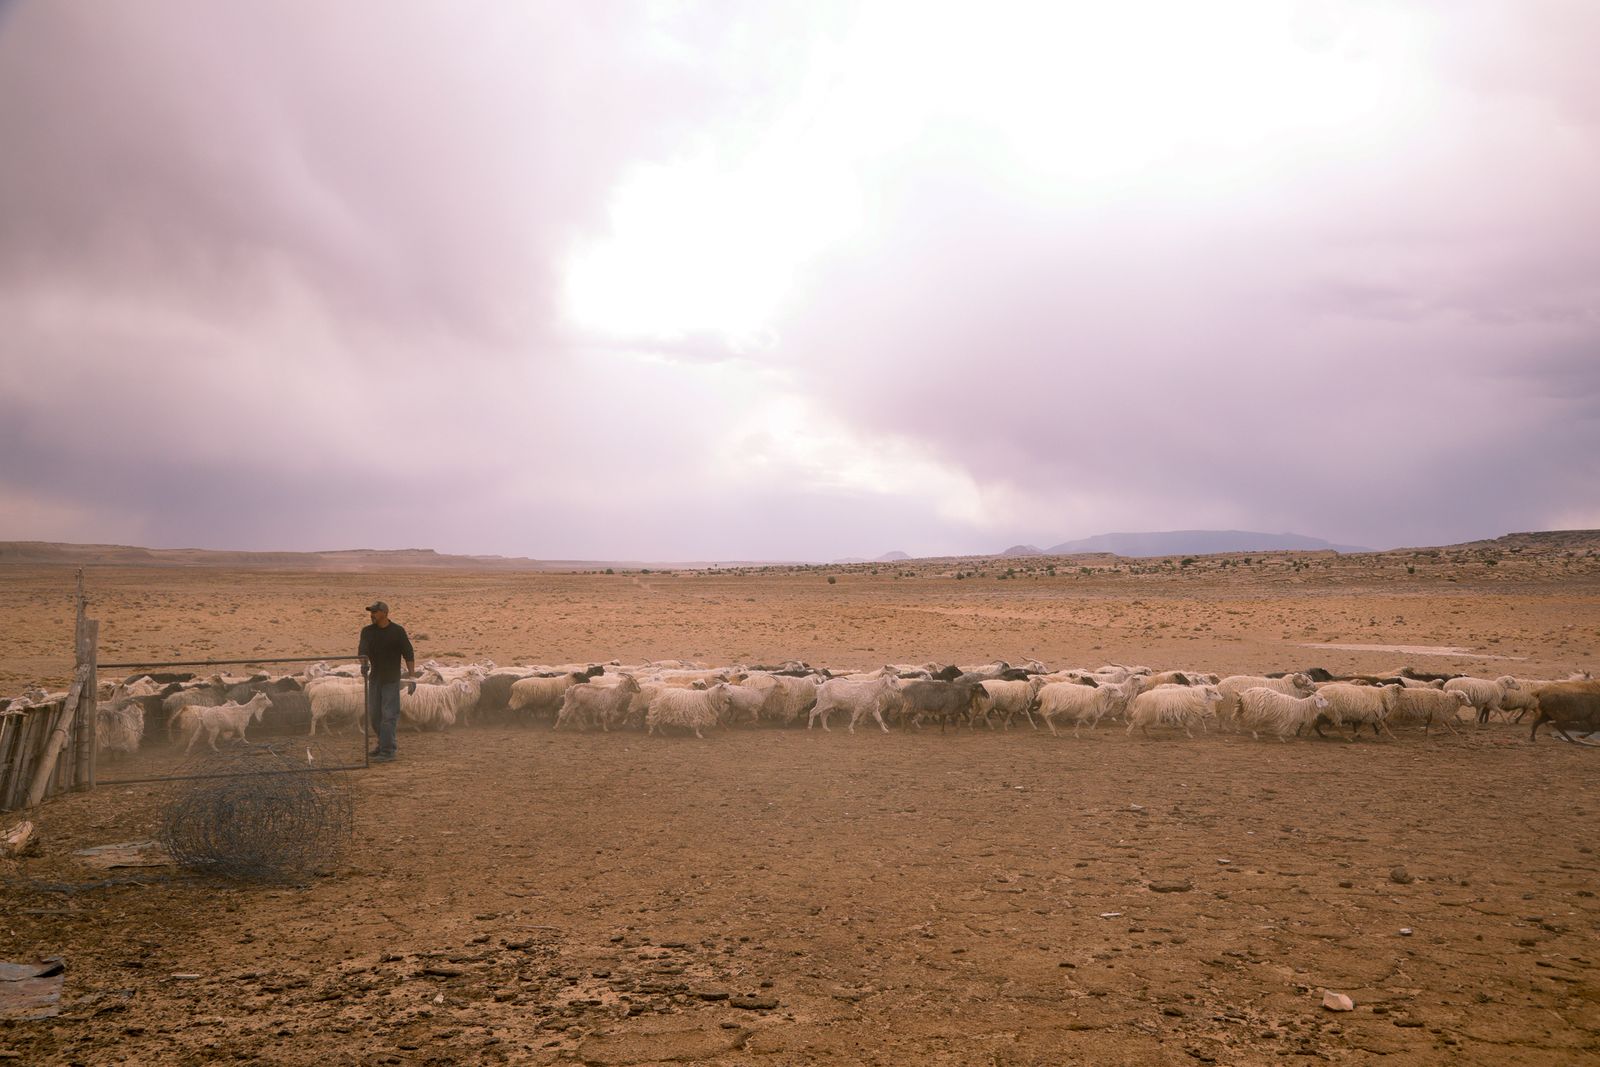 © Julien McRoberts - End of day and the shepherd lets the sheep out of the pen and back onto the land to graze till morning.